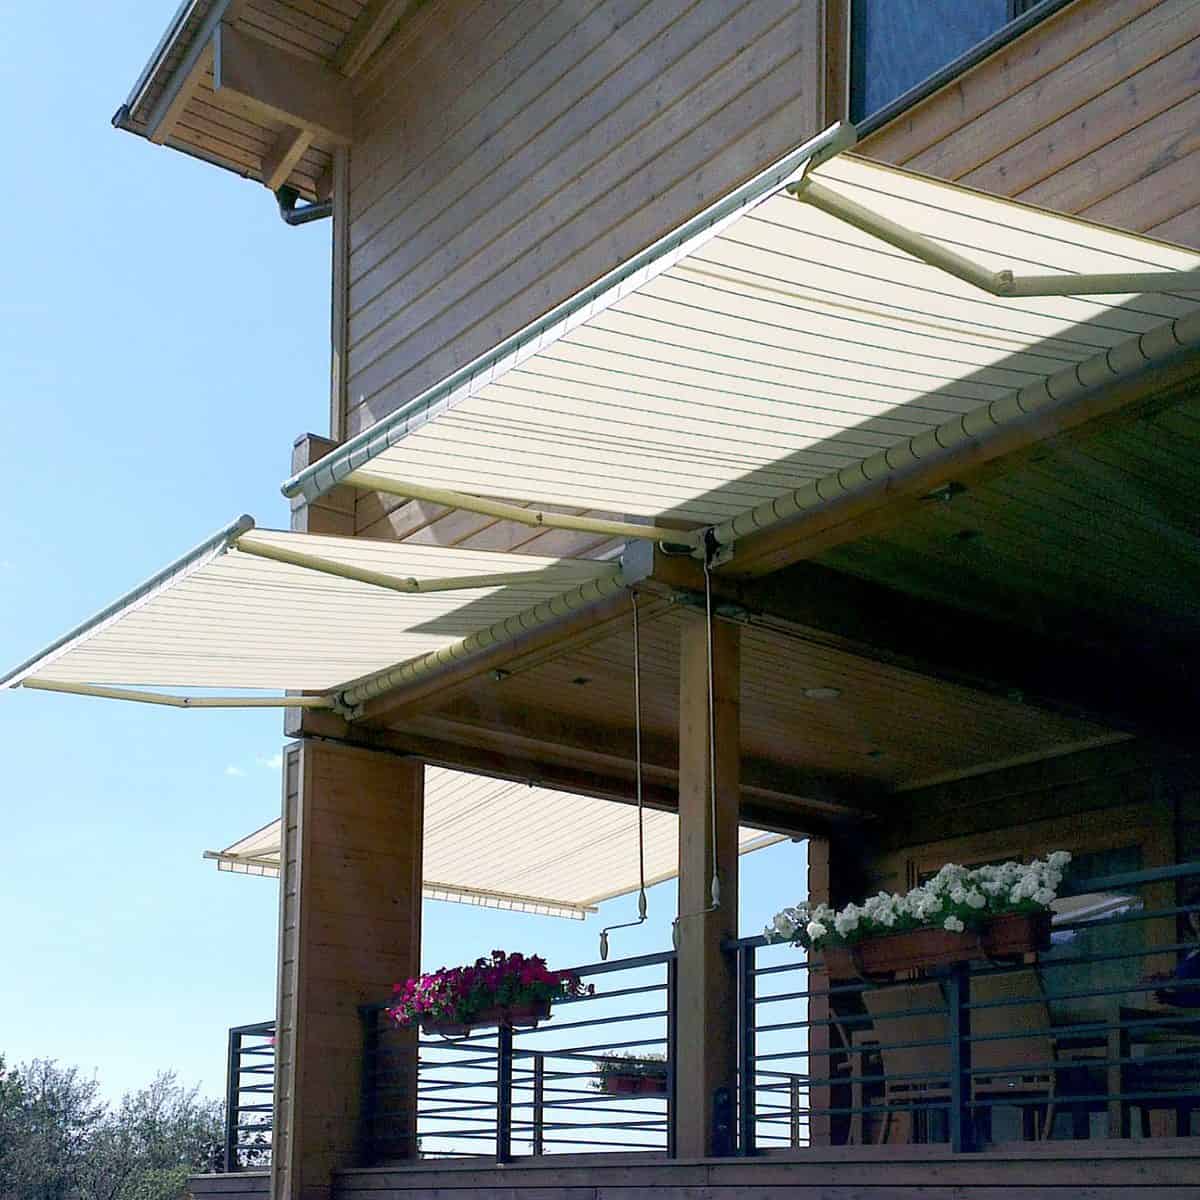 An example of a markilux 930 cassette awning over a balcony